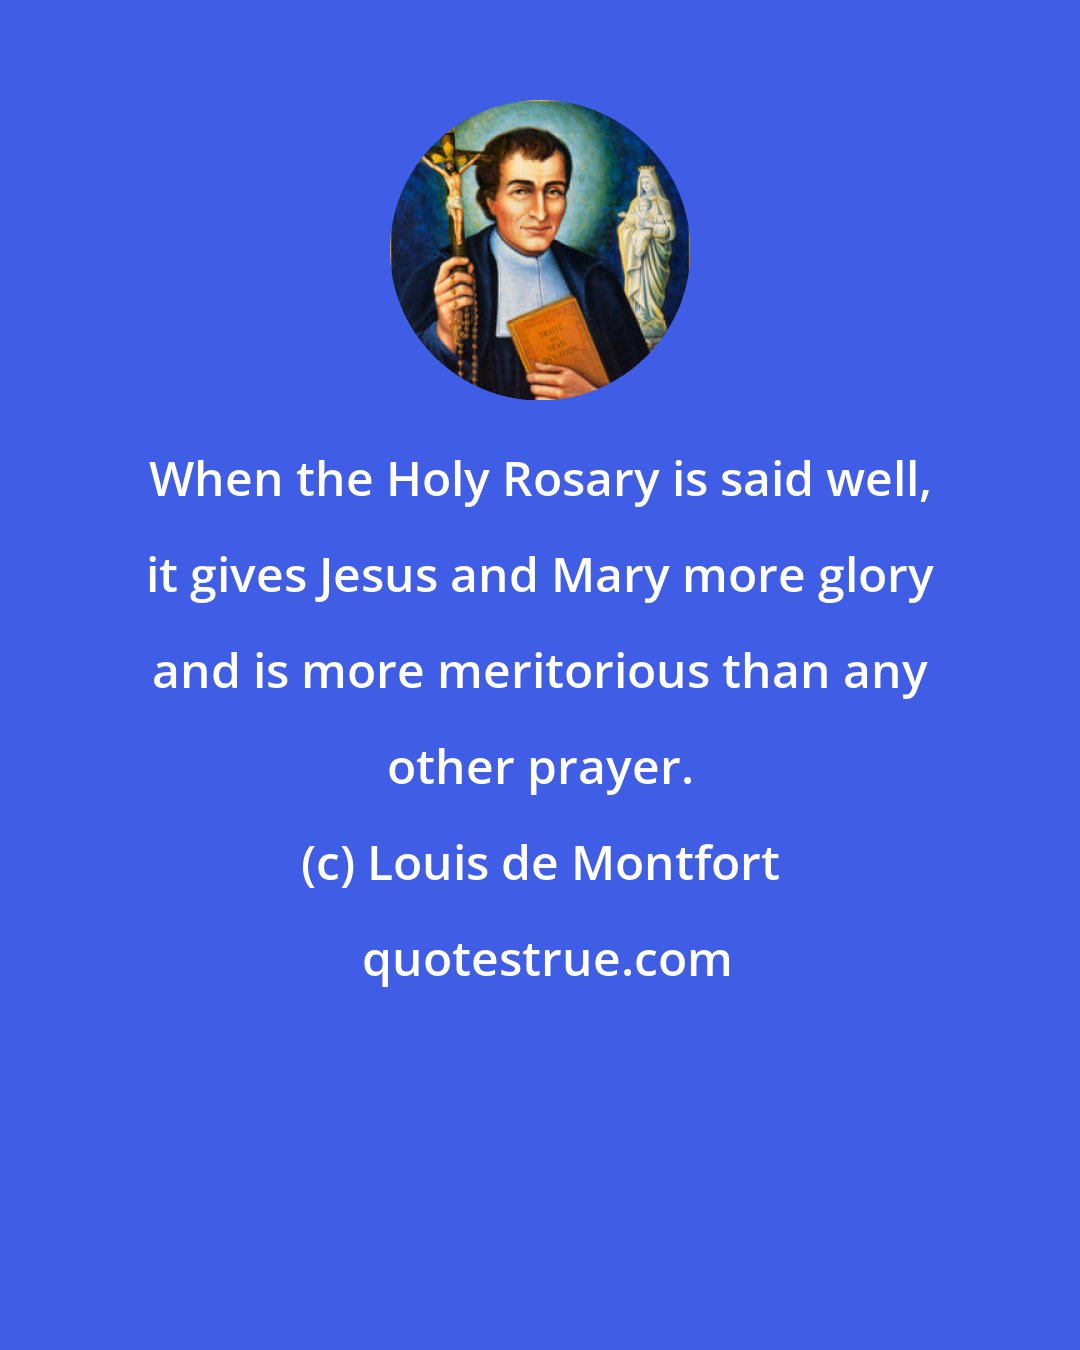 Louis de Montfort: When the Holy Rosary is said well, it gives Jesus and Mary more glory and is more meritorious than any other prayer.